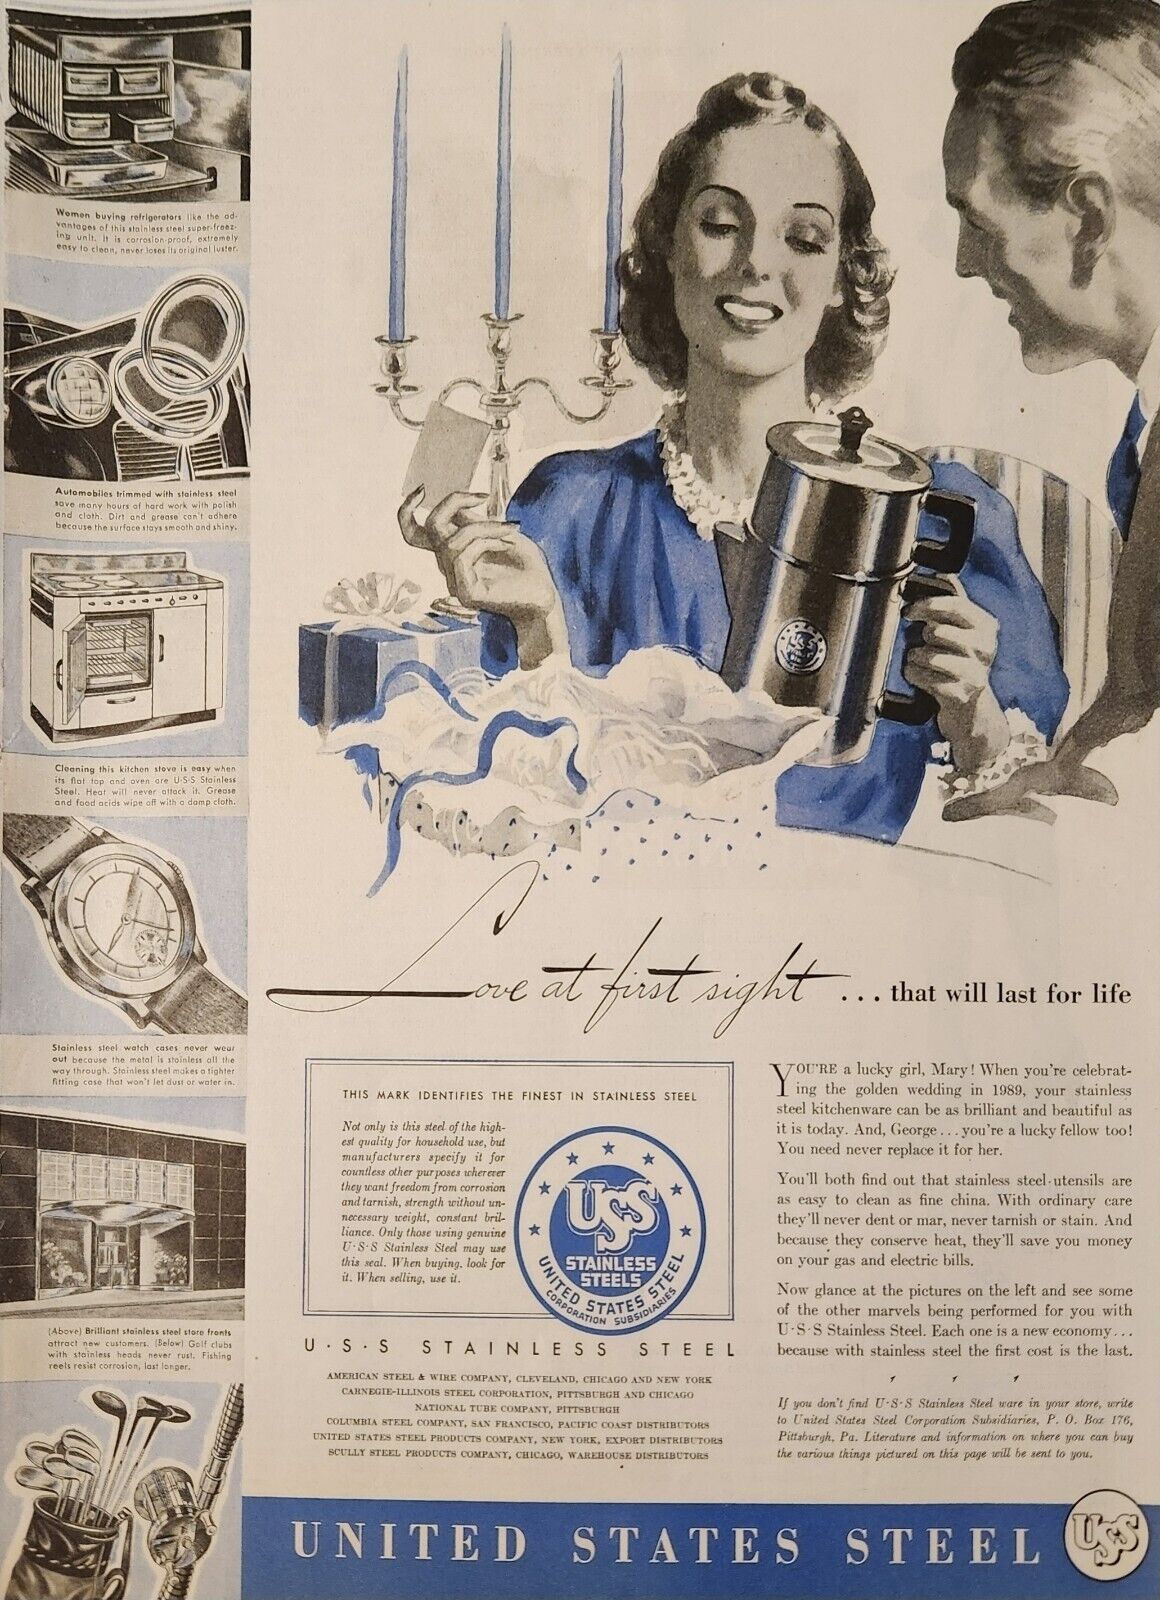 1939 United States Steel Vintage Ad Love first sight that will last for life SEP